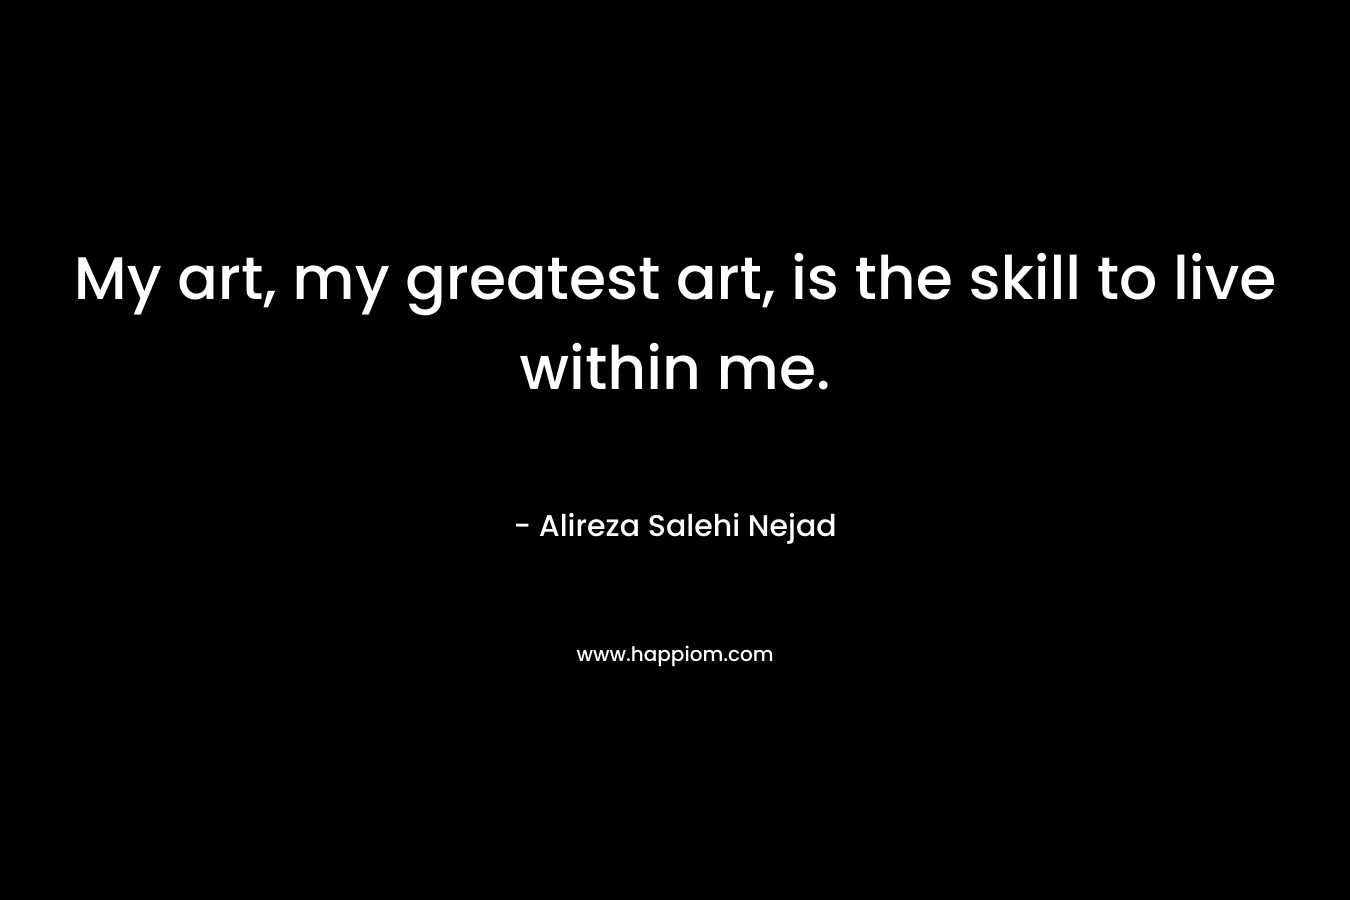 My art, my greatest art, is the skill to live within me.